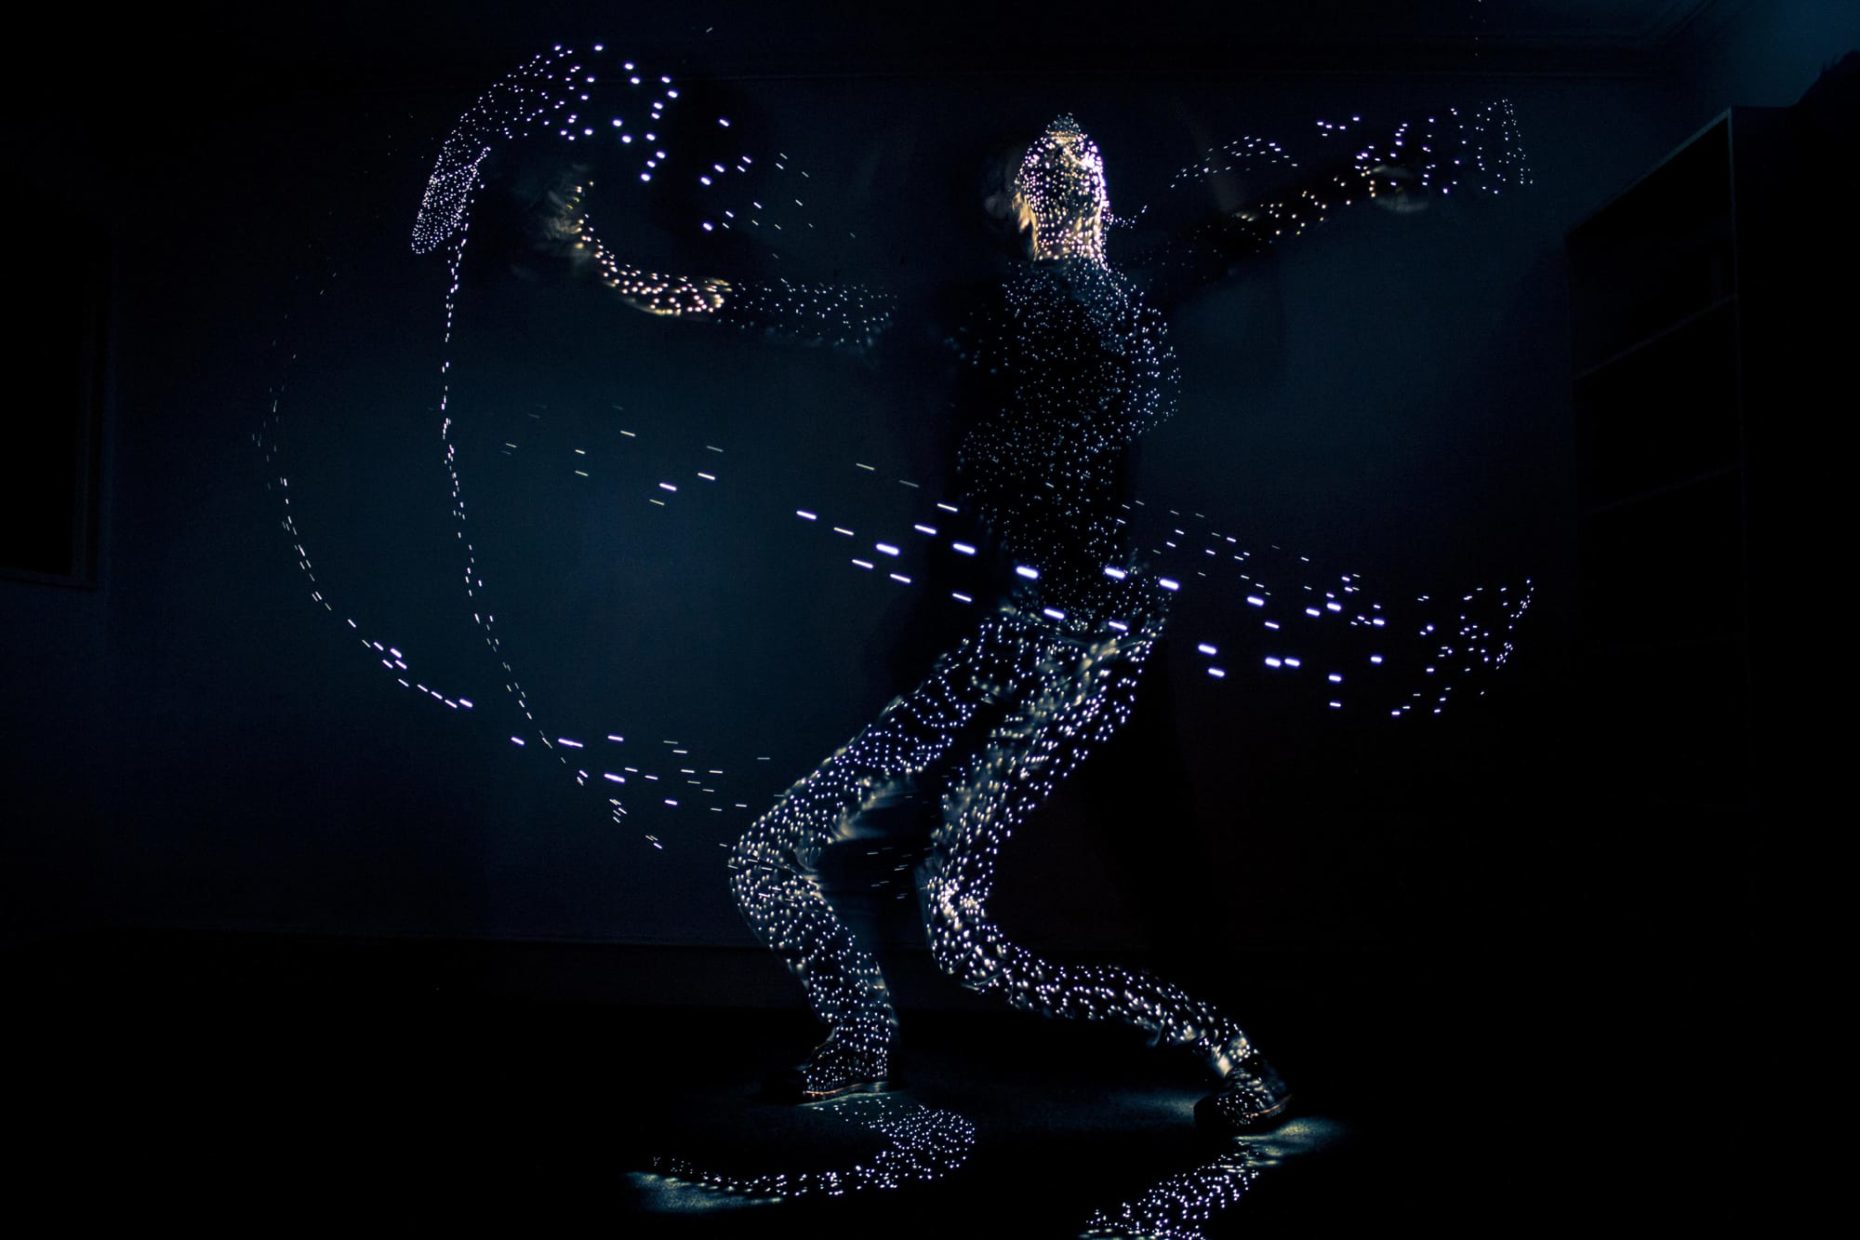 Long exposure photo of a person painting himslef with a lightbrush